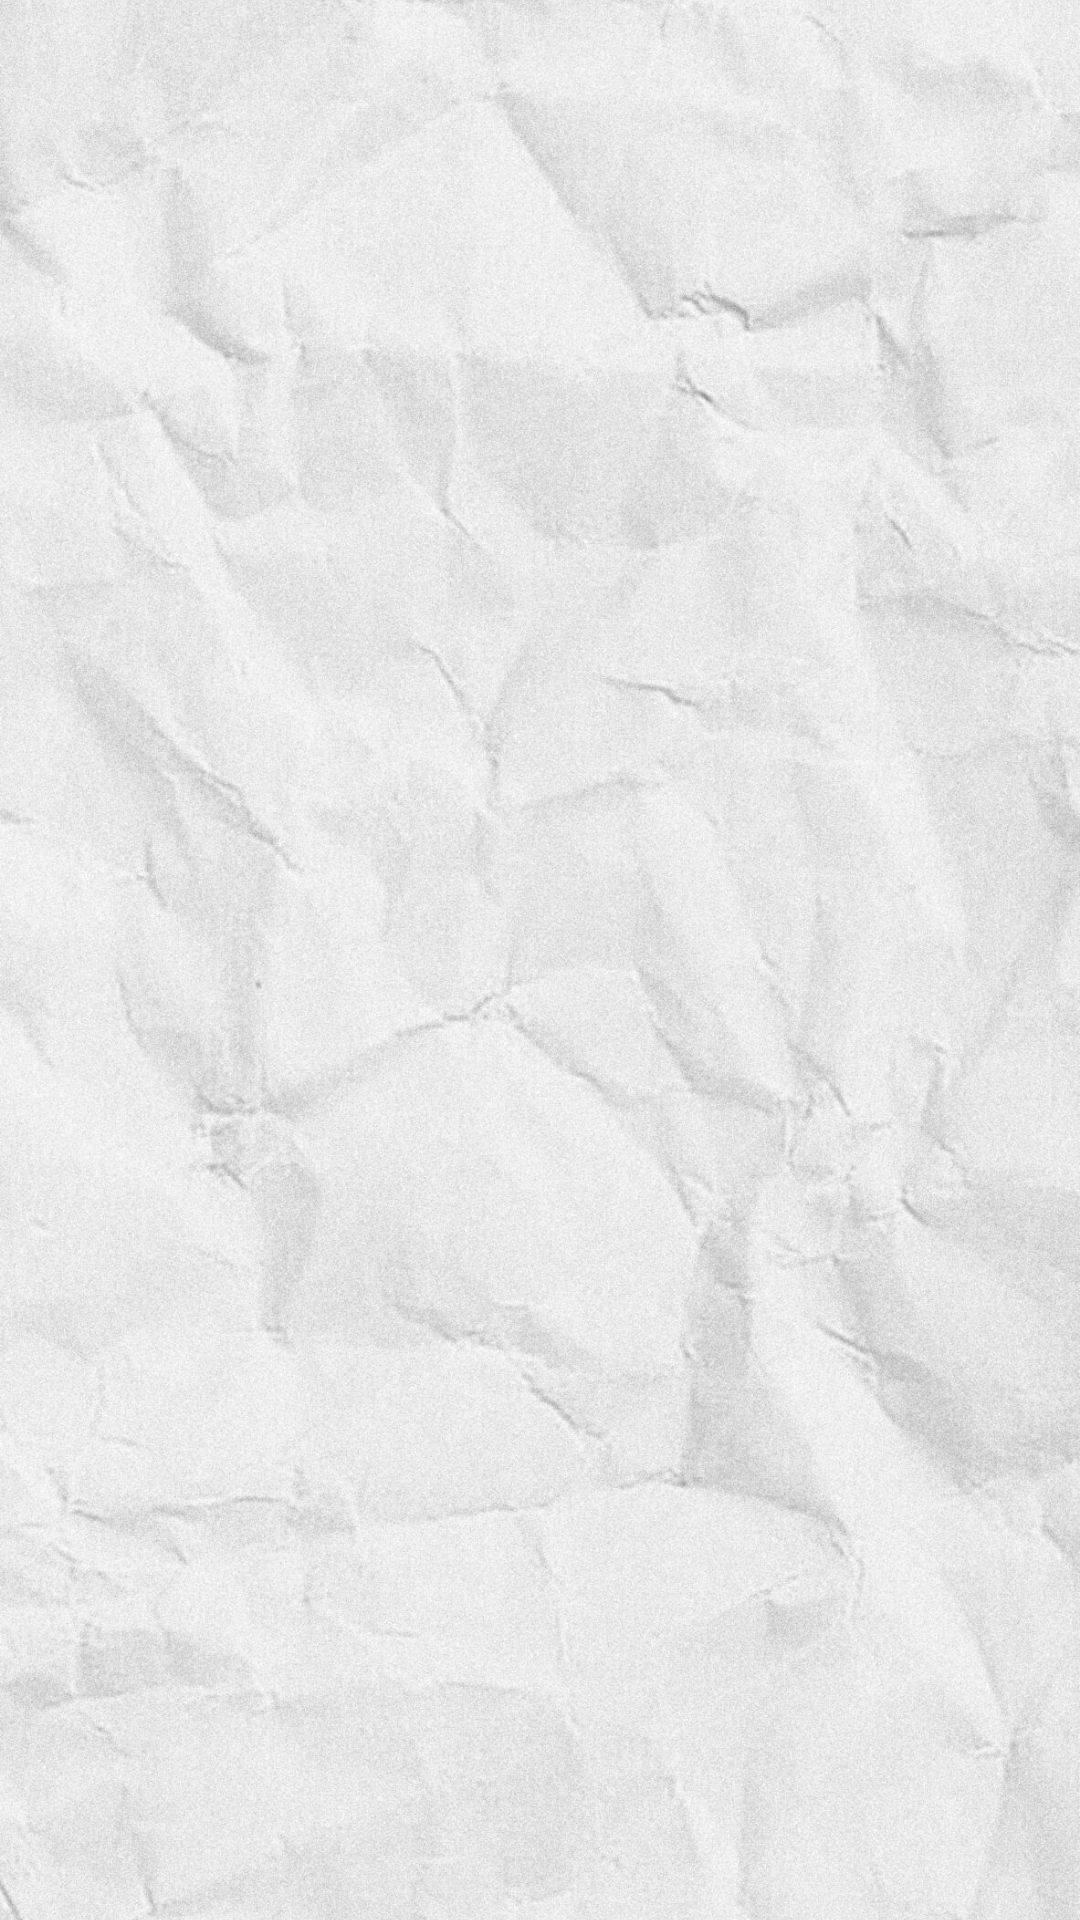 Crumpled Aesthetic White Paper Background